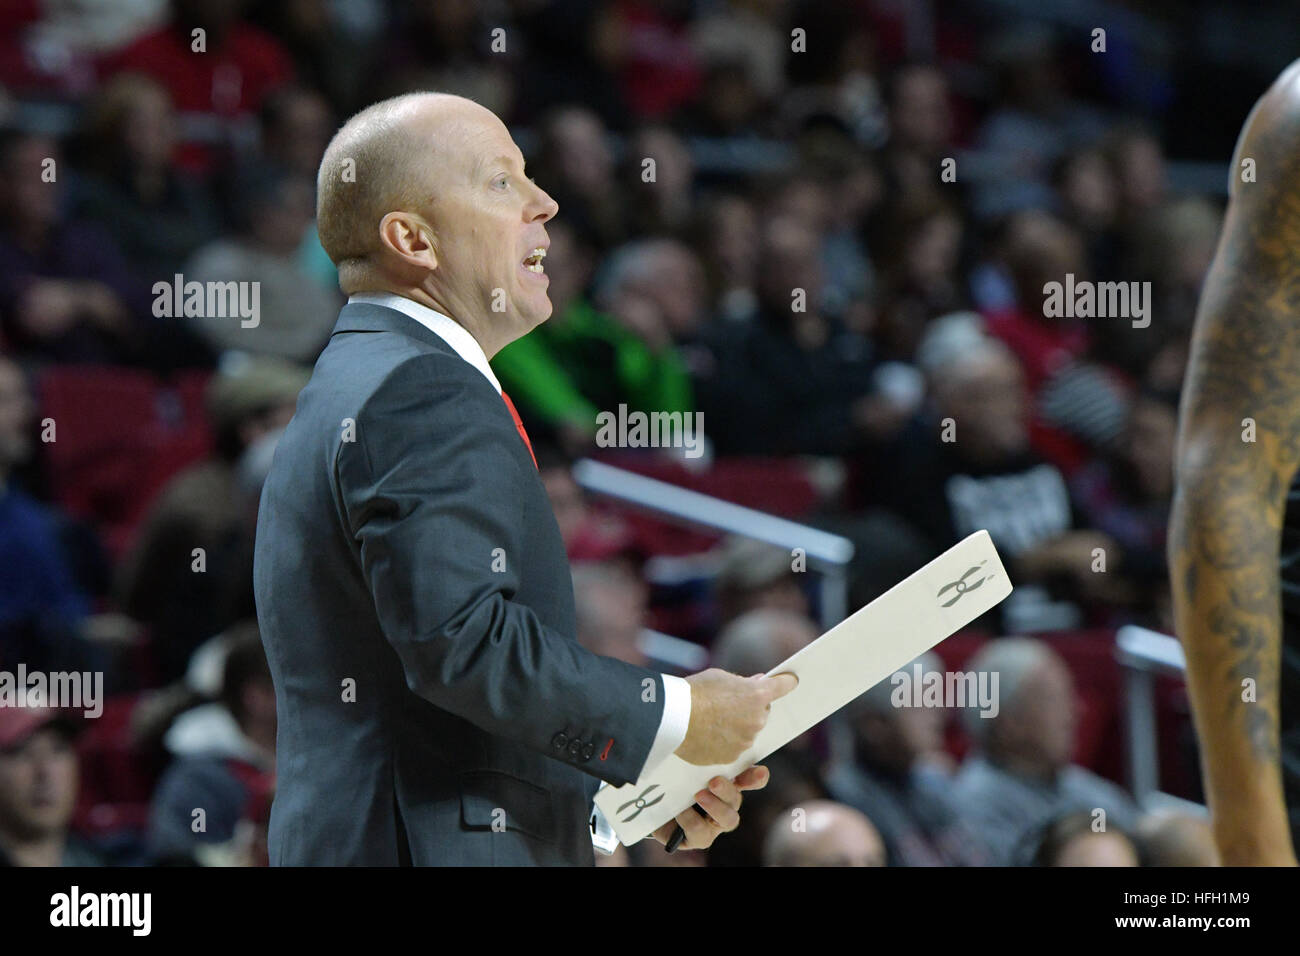 Philadelphia, Pennsylvania, USA. 28th Dec, 2016. Cincinnati Bearcats head coach MICK CRONIN gestures towards the court holding a clipboard during the American Athletic Conference basketball game being played at the Liacouras Center in Philadelphia. The Bearcats beat the Owls 56-50 in the AAC opener for both teams. © Ken Inness/ZUMA Wire/Alamy Live News Stock Photo